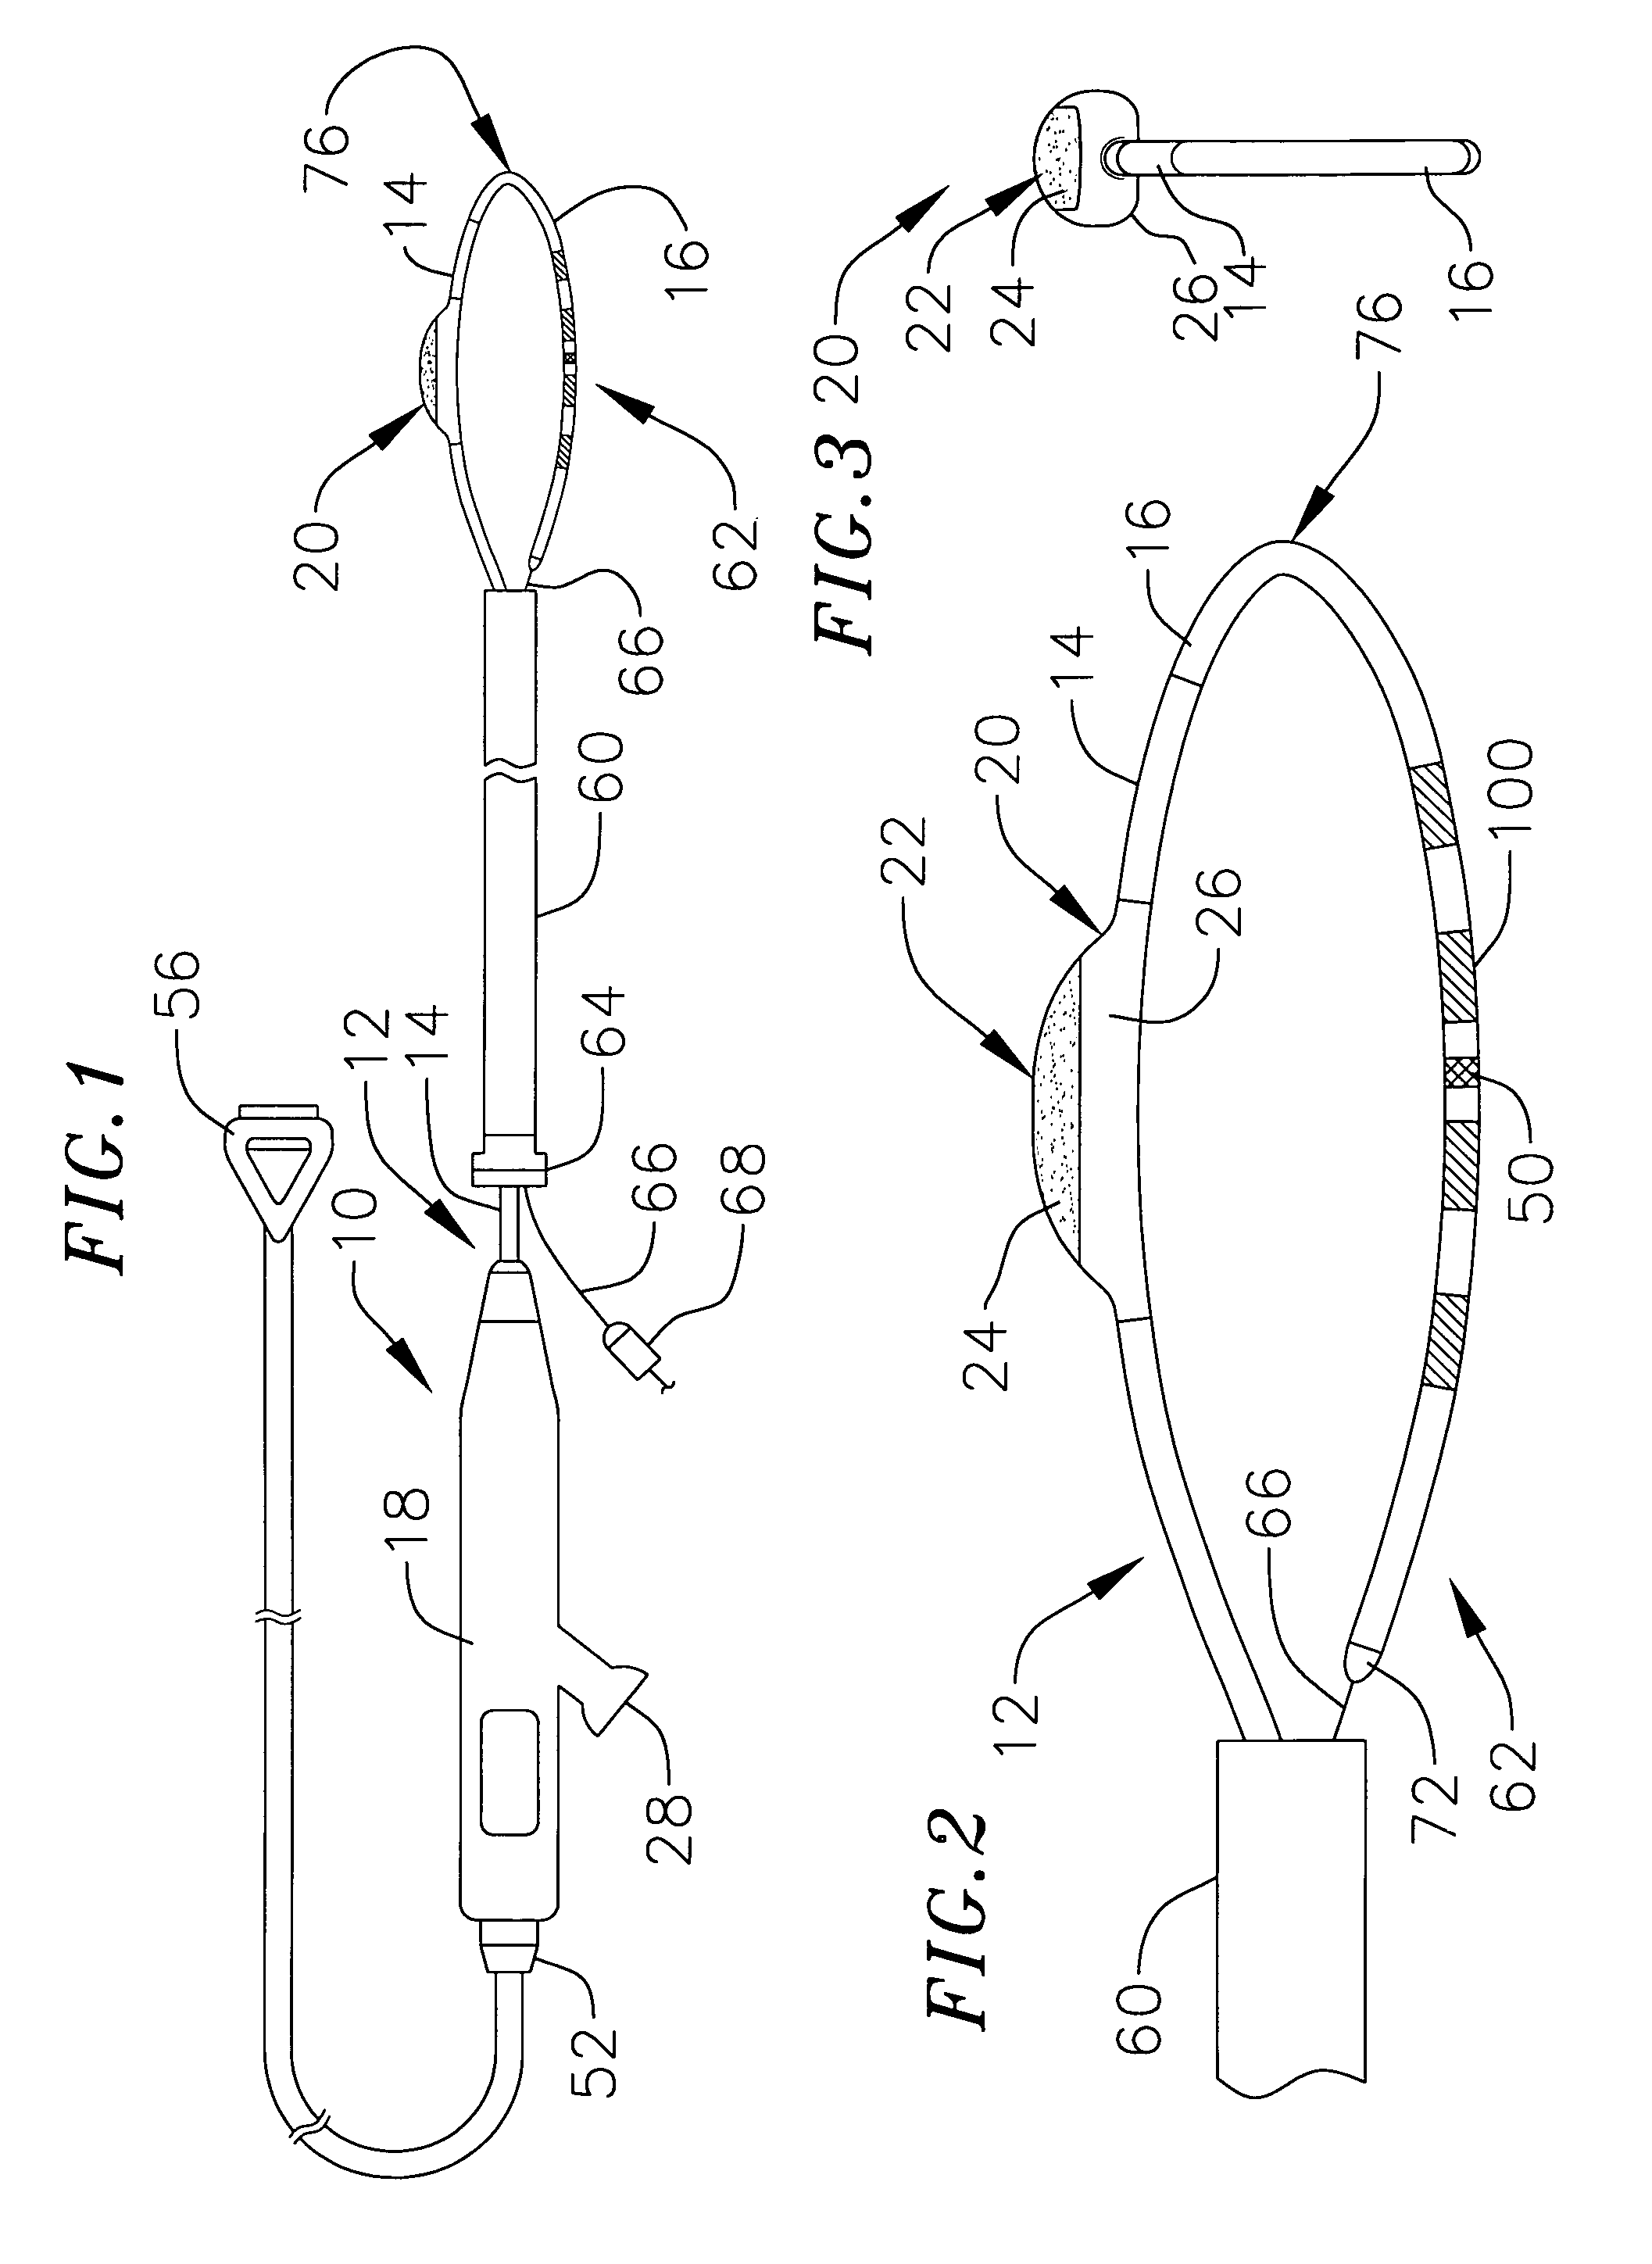 Loop structure including inflatable therapeutic device